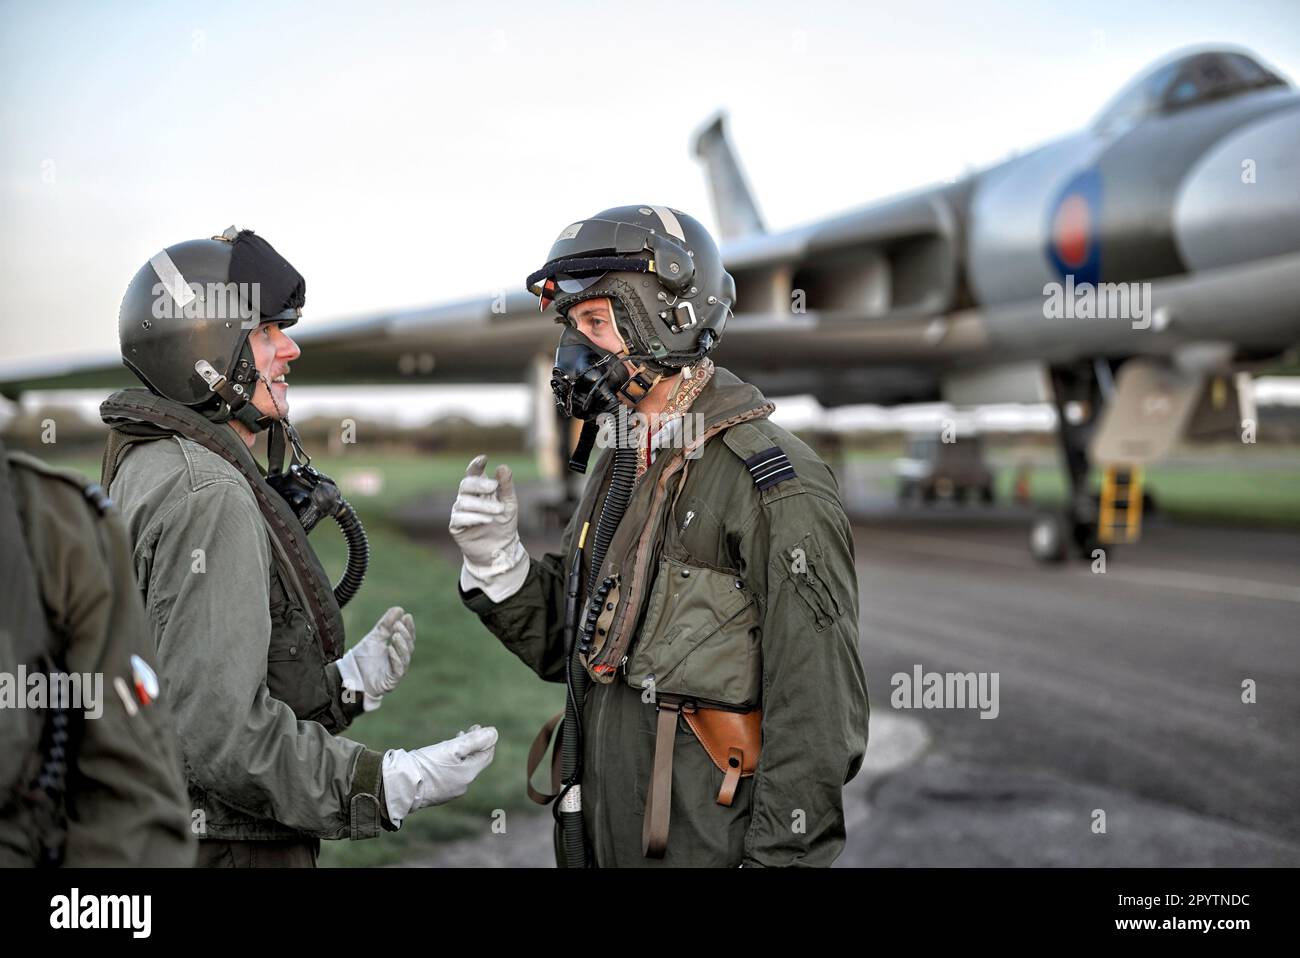 Fighter pilots combat pressure flight suit and oxygen breathing apparatus with the Vulcan Bomber XM 655 aircraft at Wellesbourne Airfield, England UK Stock Photo